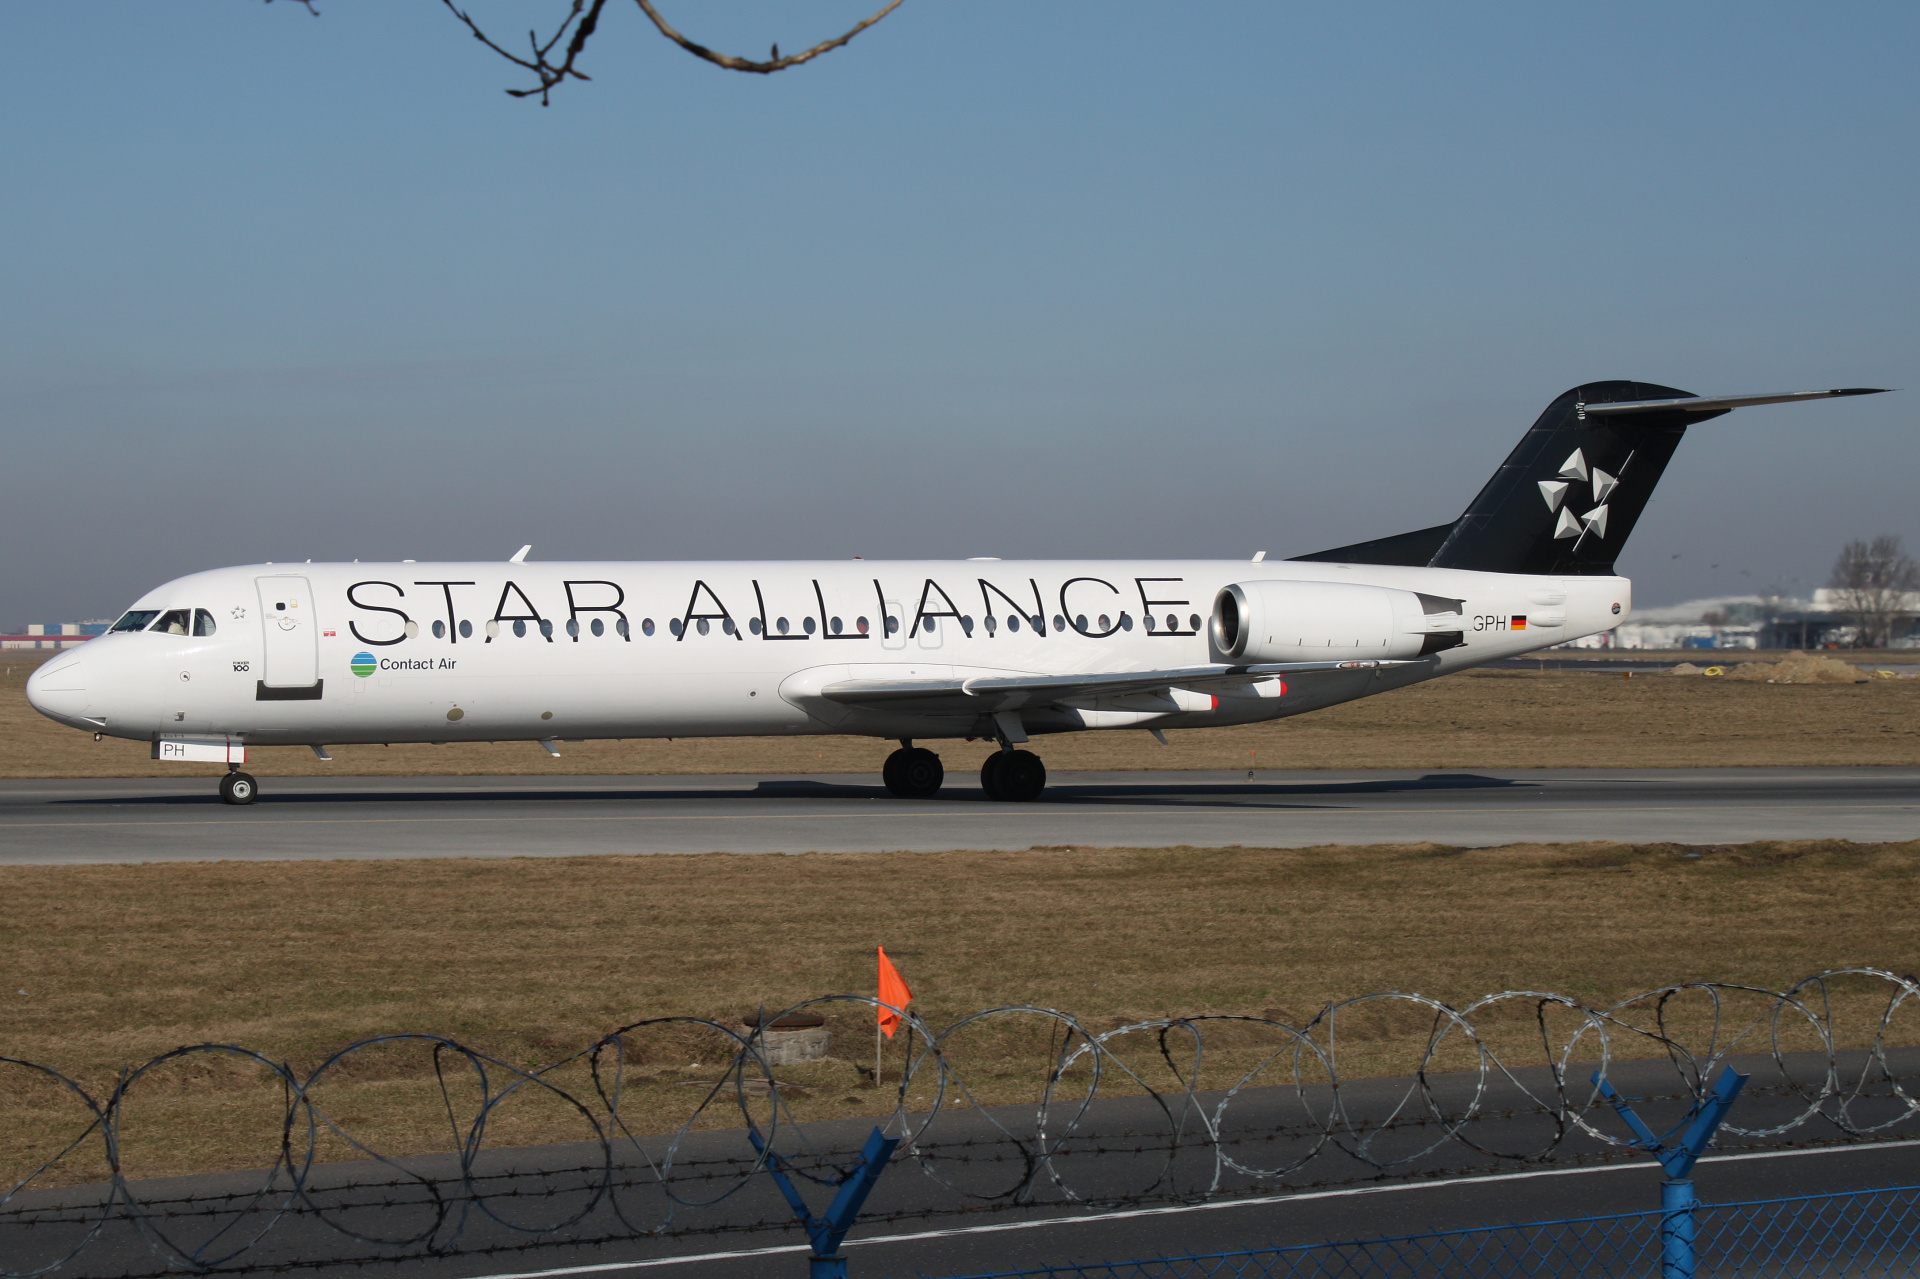 D-AGPH (Star Alliance livery) (Aircraft » EPWA Spotting » Fokker 100 » Contact Air)